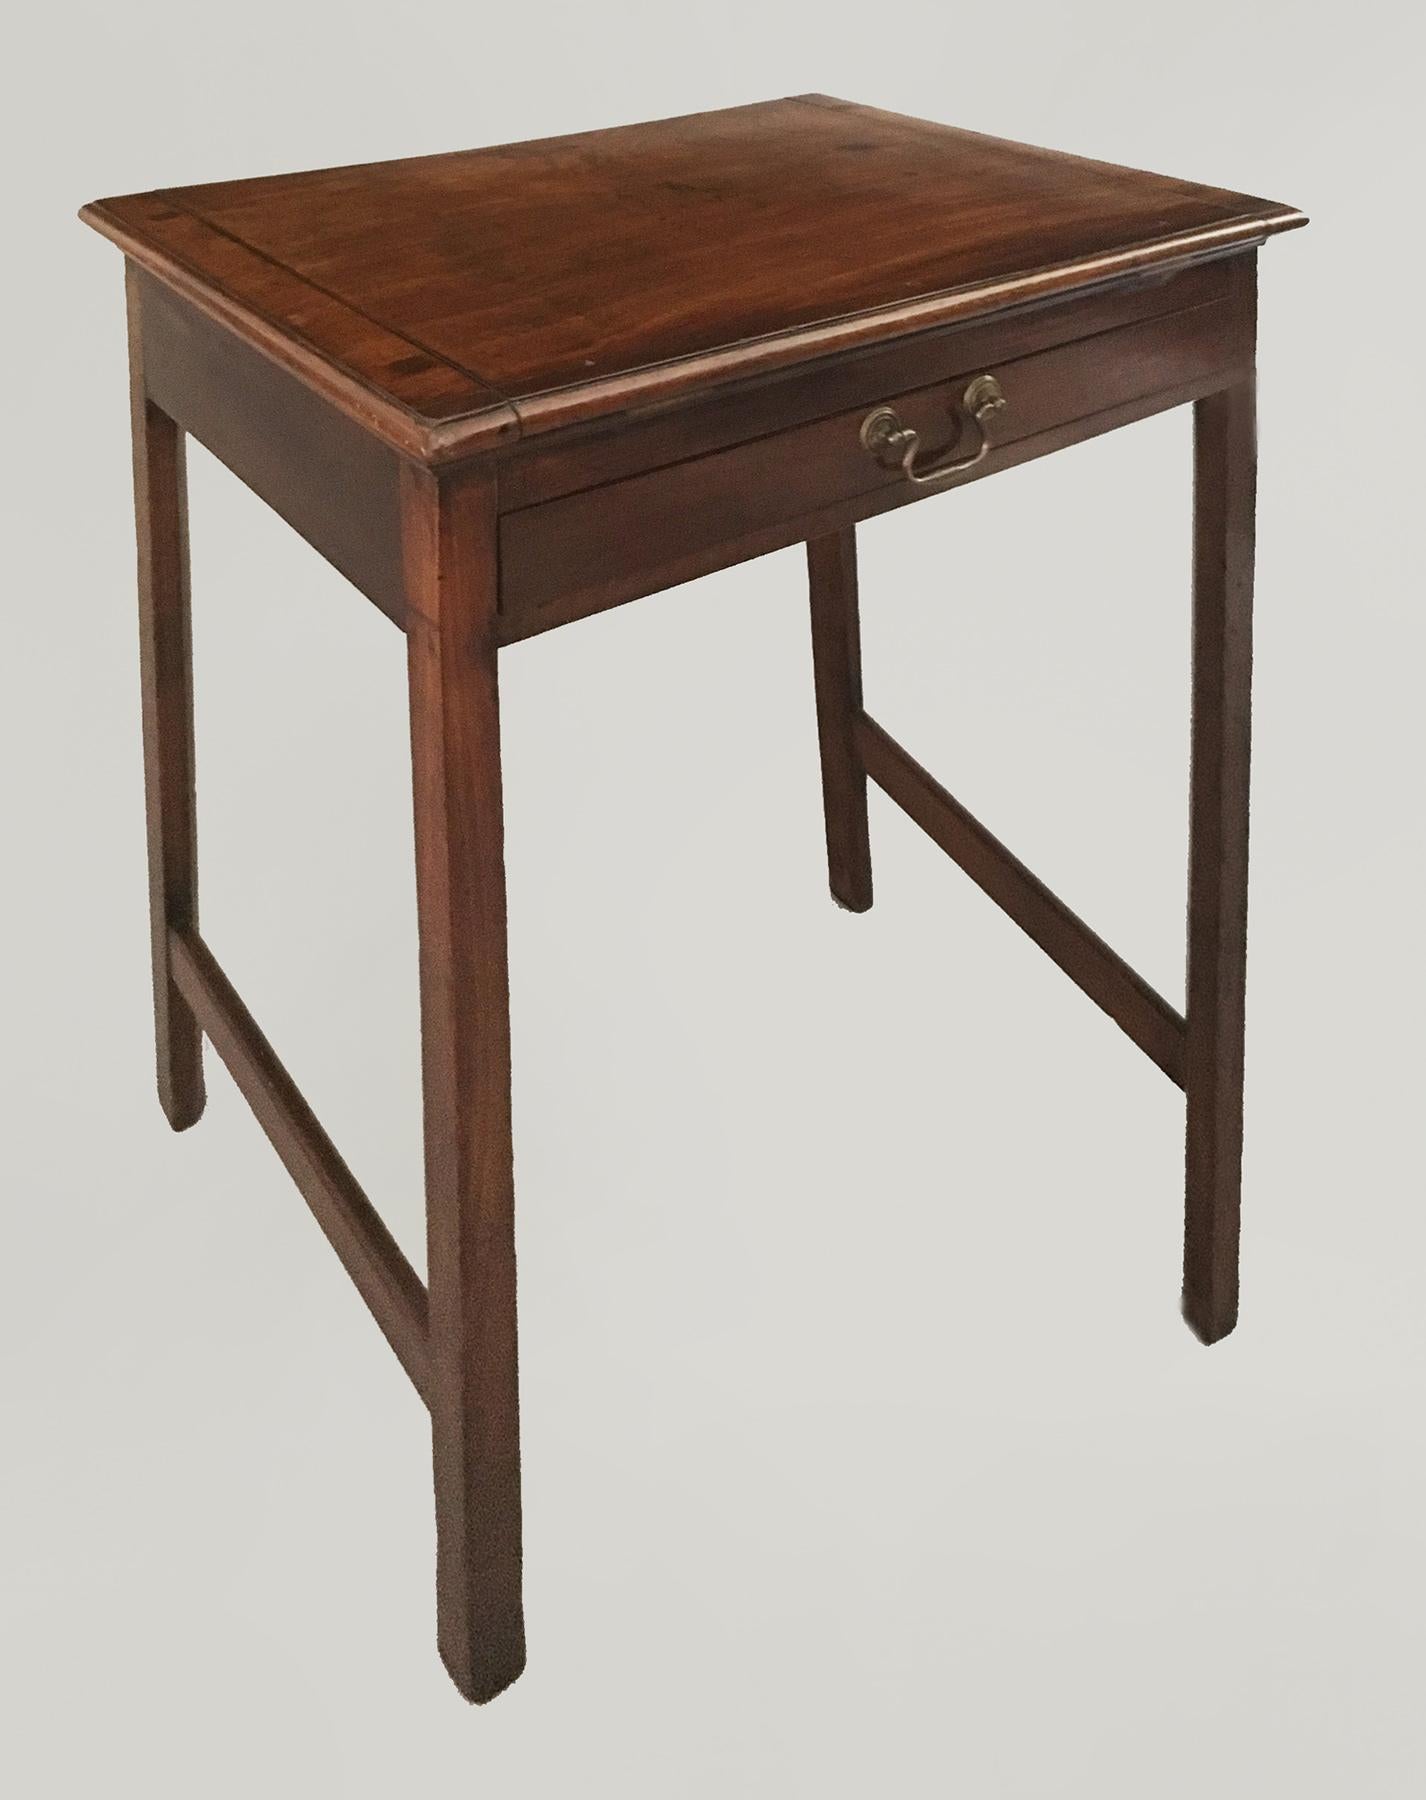 George III mahogany reading or writing table with an adjustable reading slope and a removable ledge, one drawer with a brass swan neck handle, raised on straight legs with H-shaped stretchers.